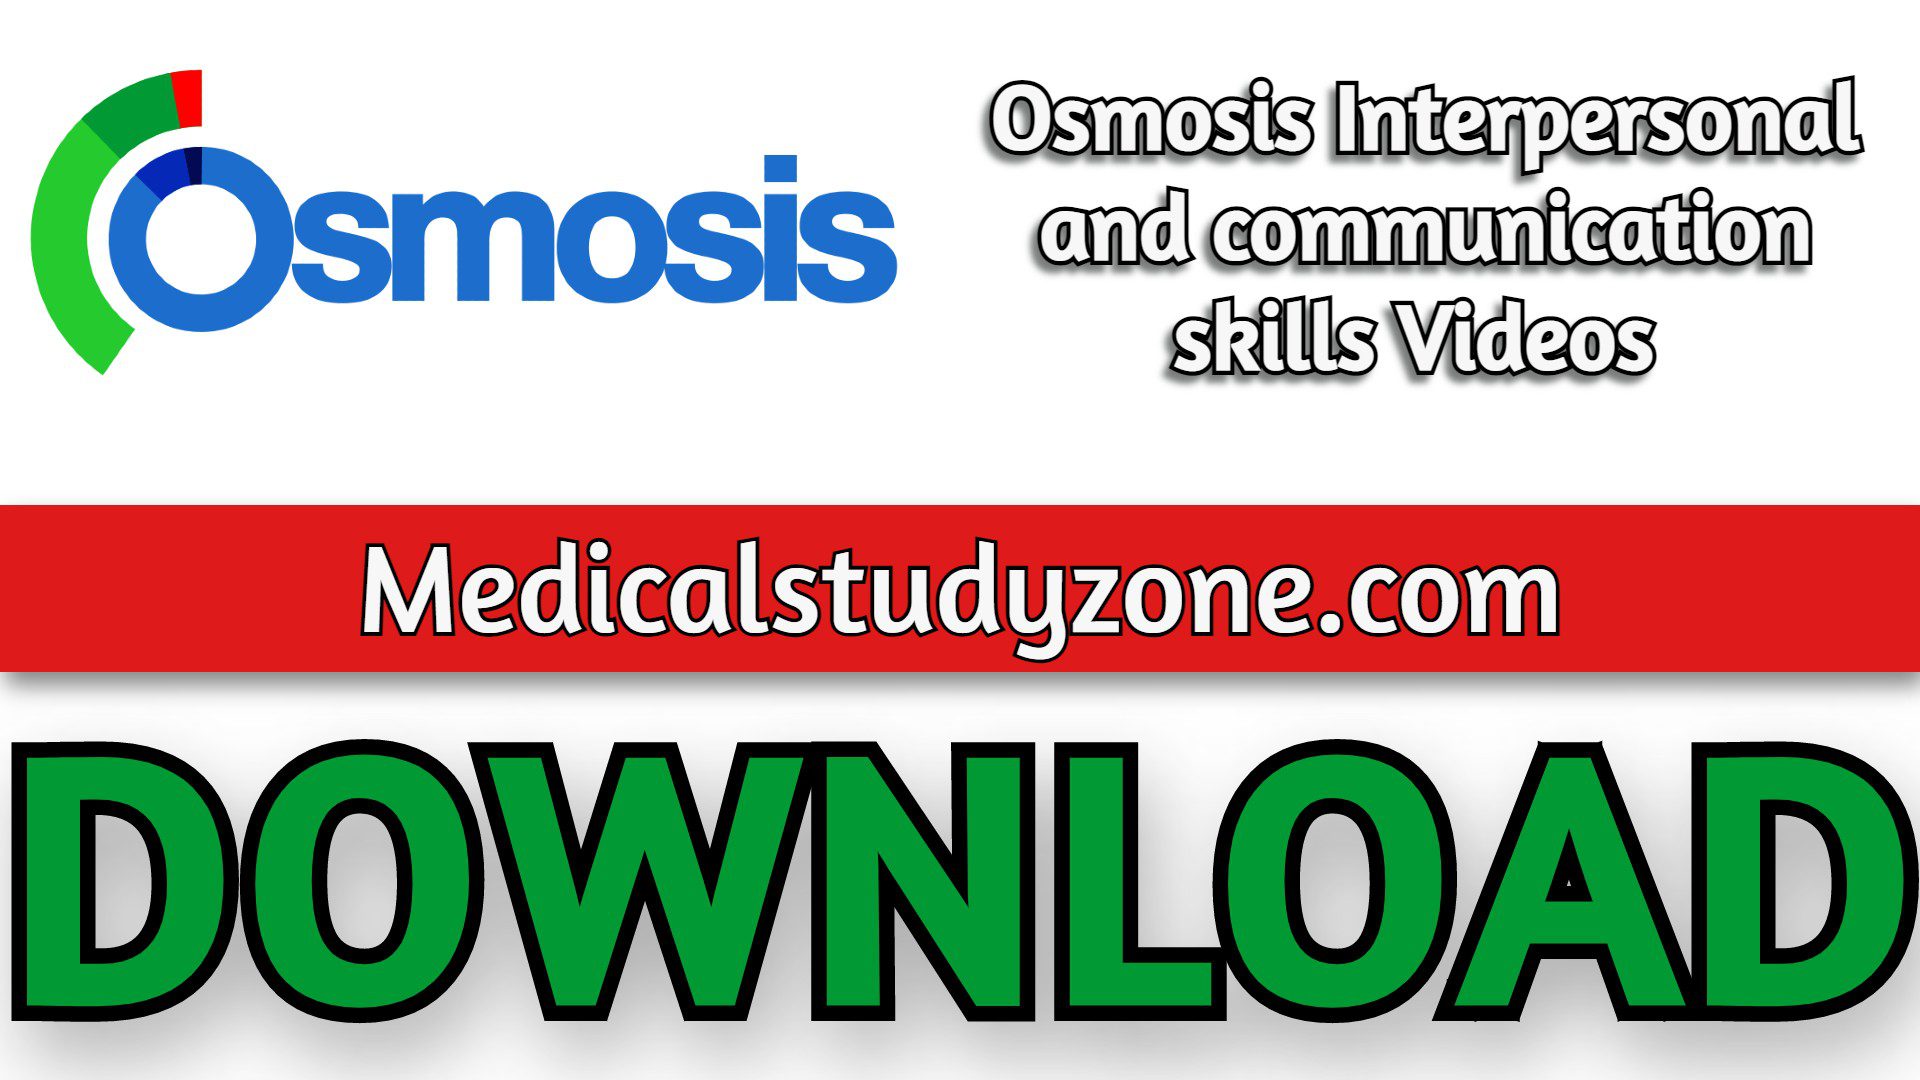 Osmosis Interpersonal and communication skills Videos 2022 Free Download